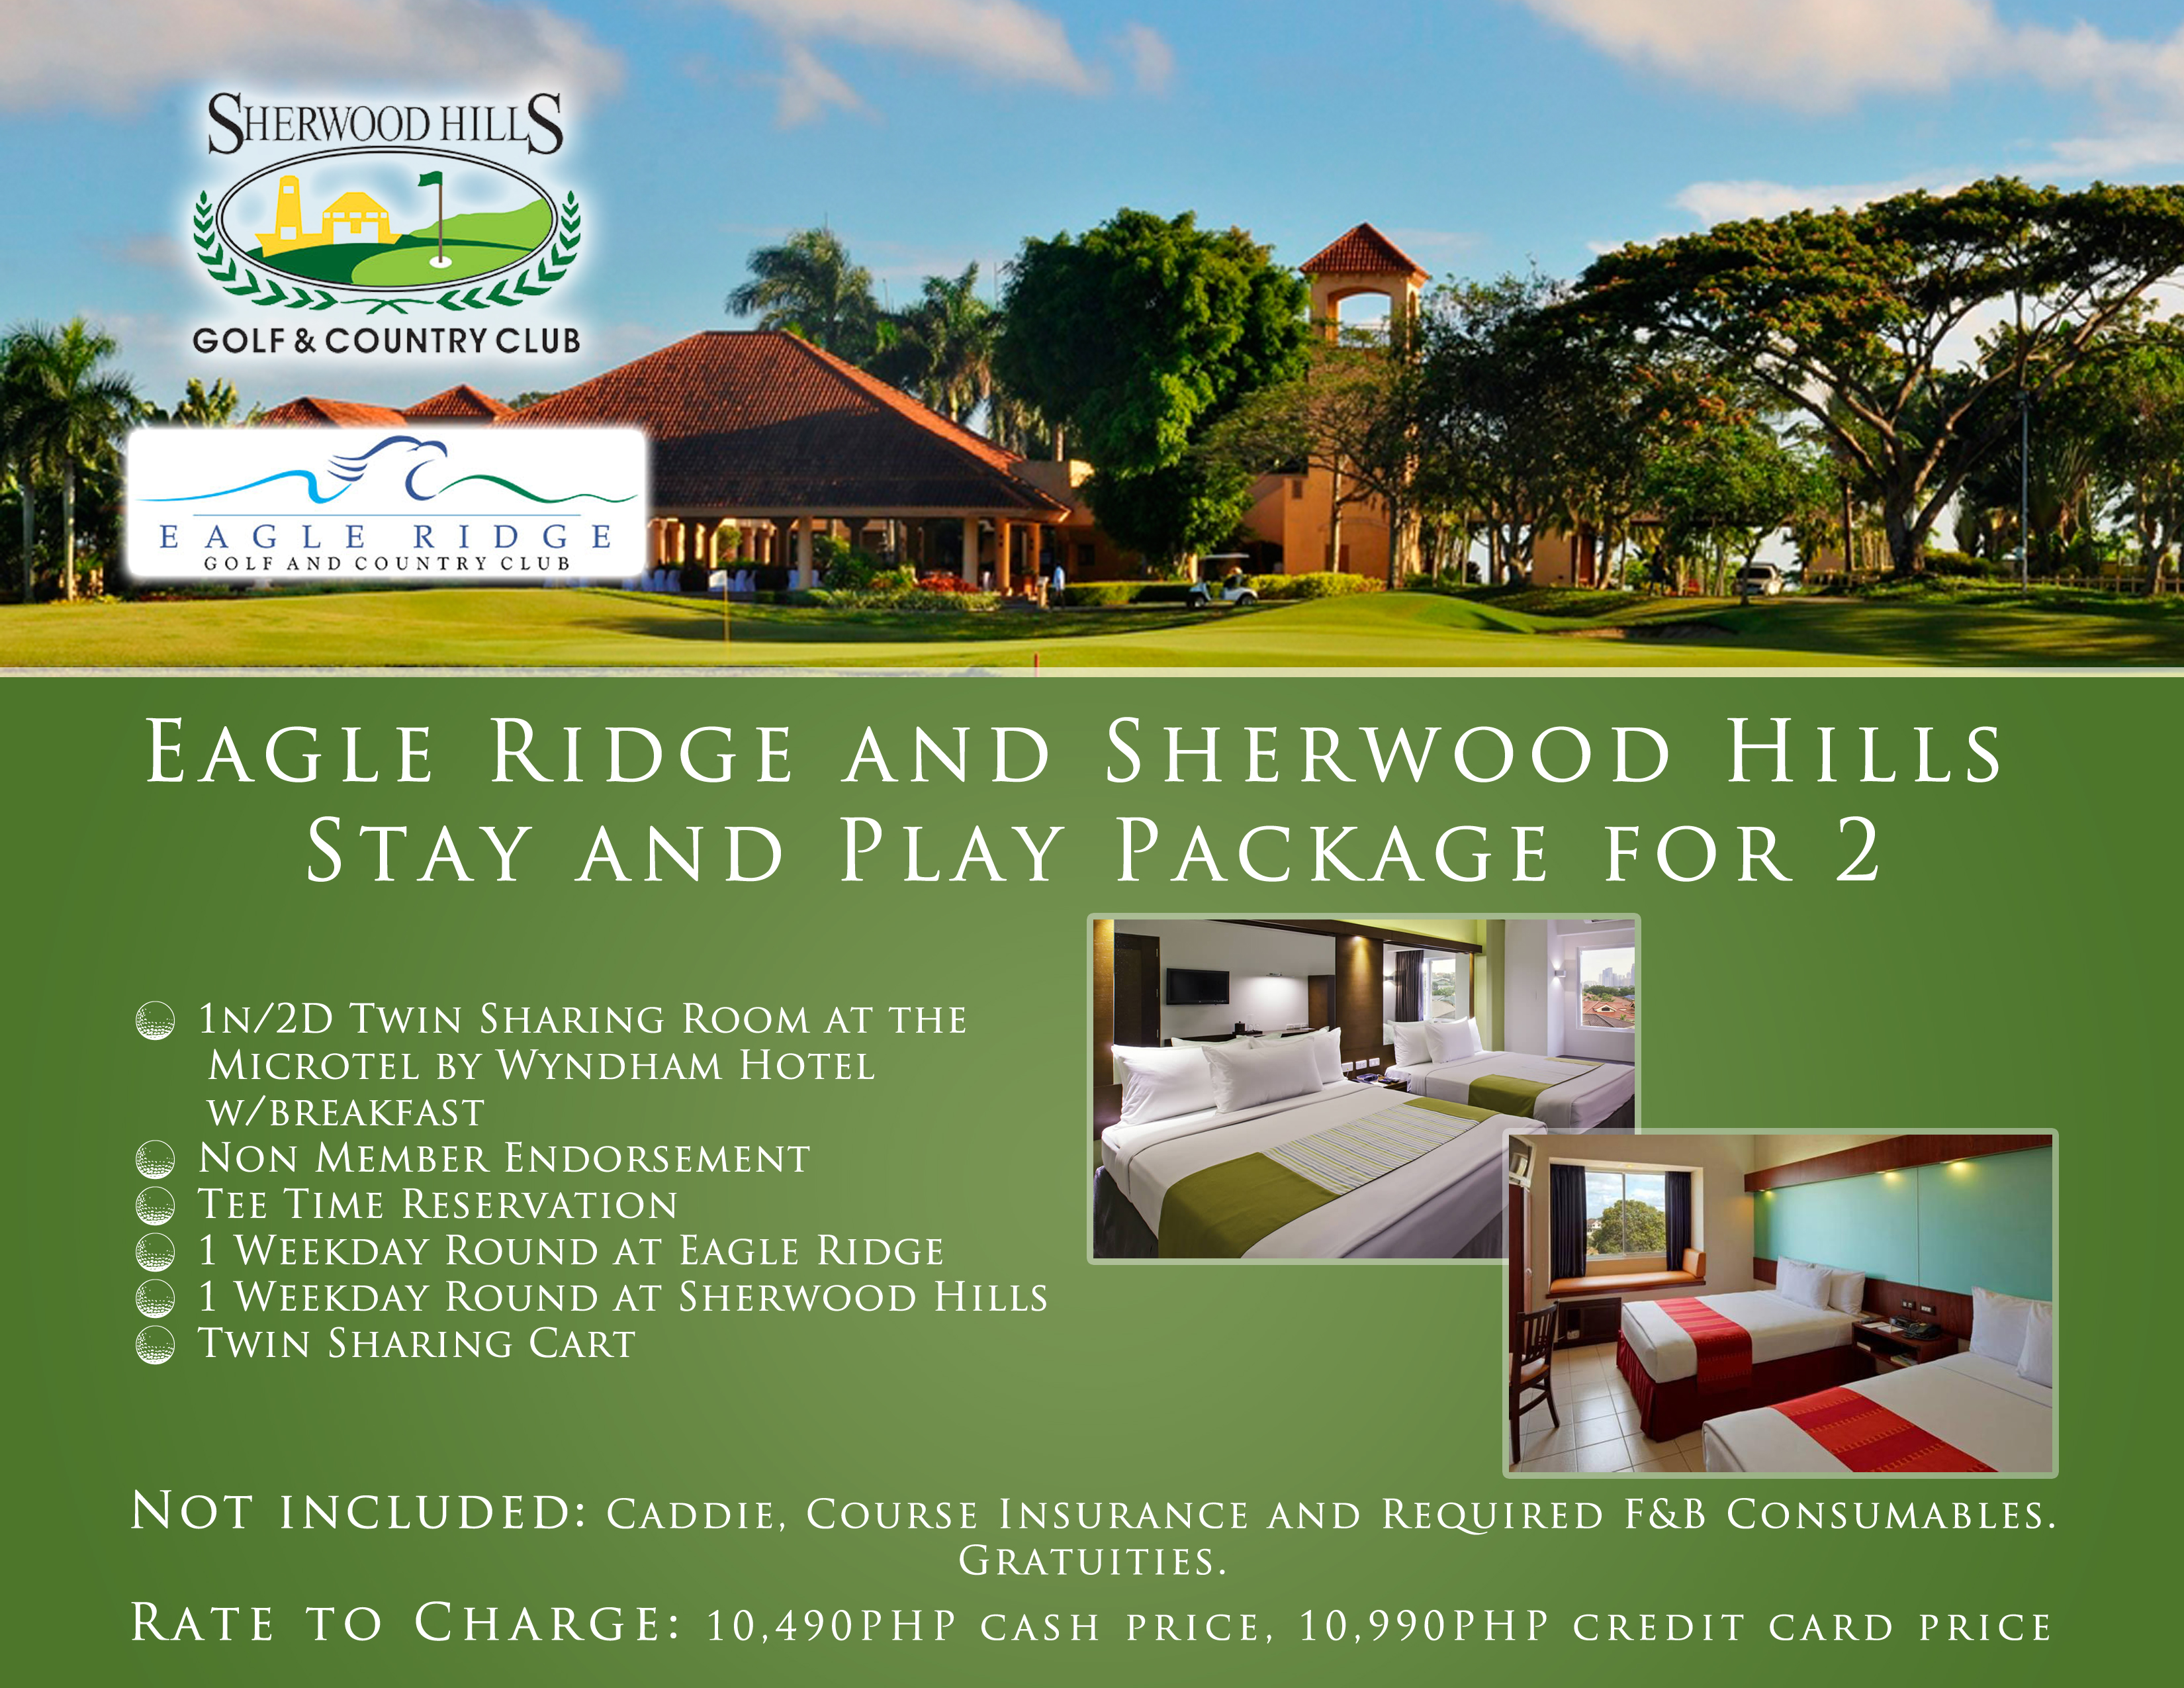 Offer #2 - Eagle Ridge and Sherwood Hills Stay and Play Package for 2